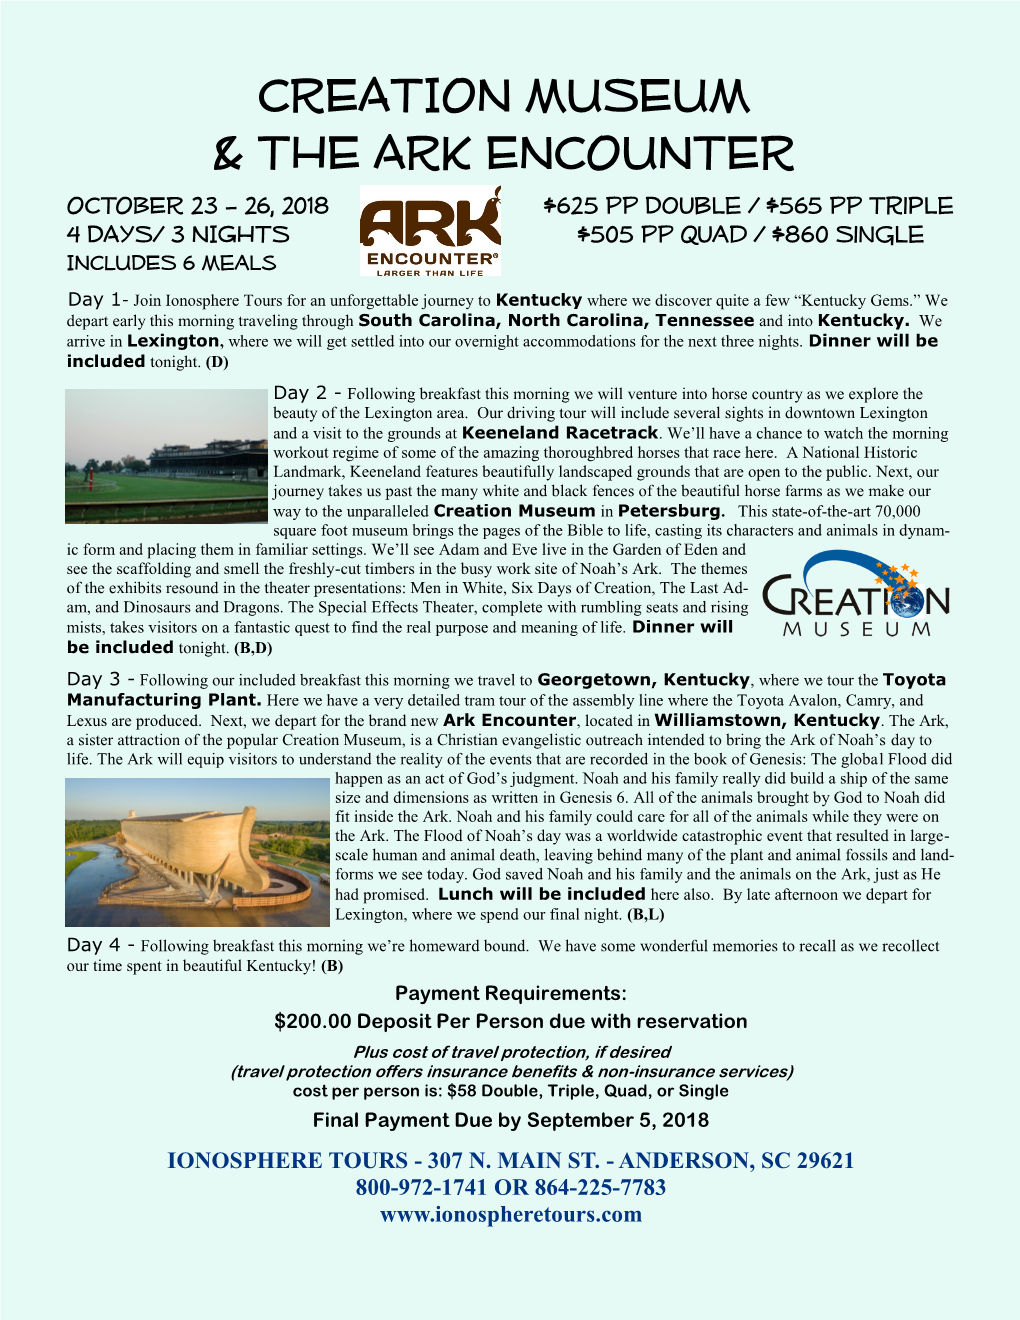 Creation Museum & the Ark Encounter